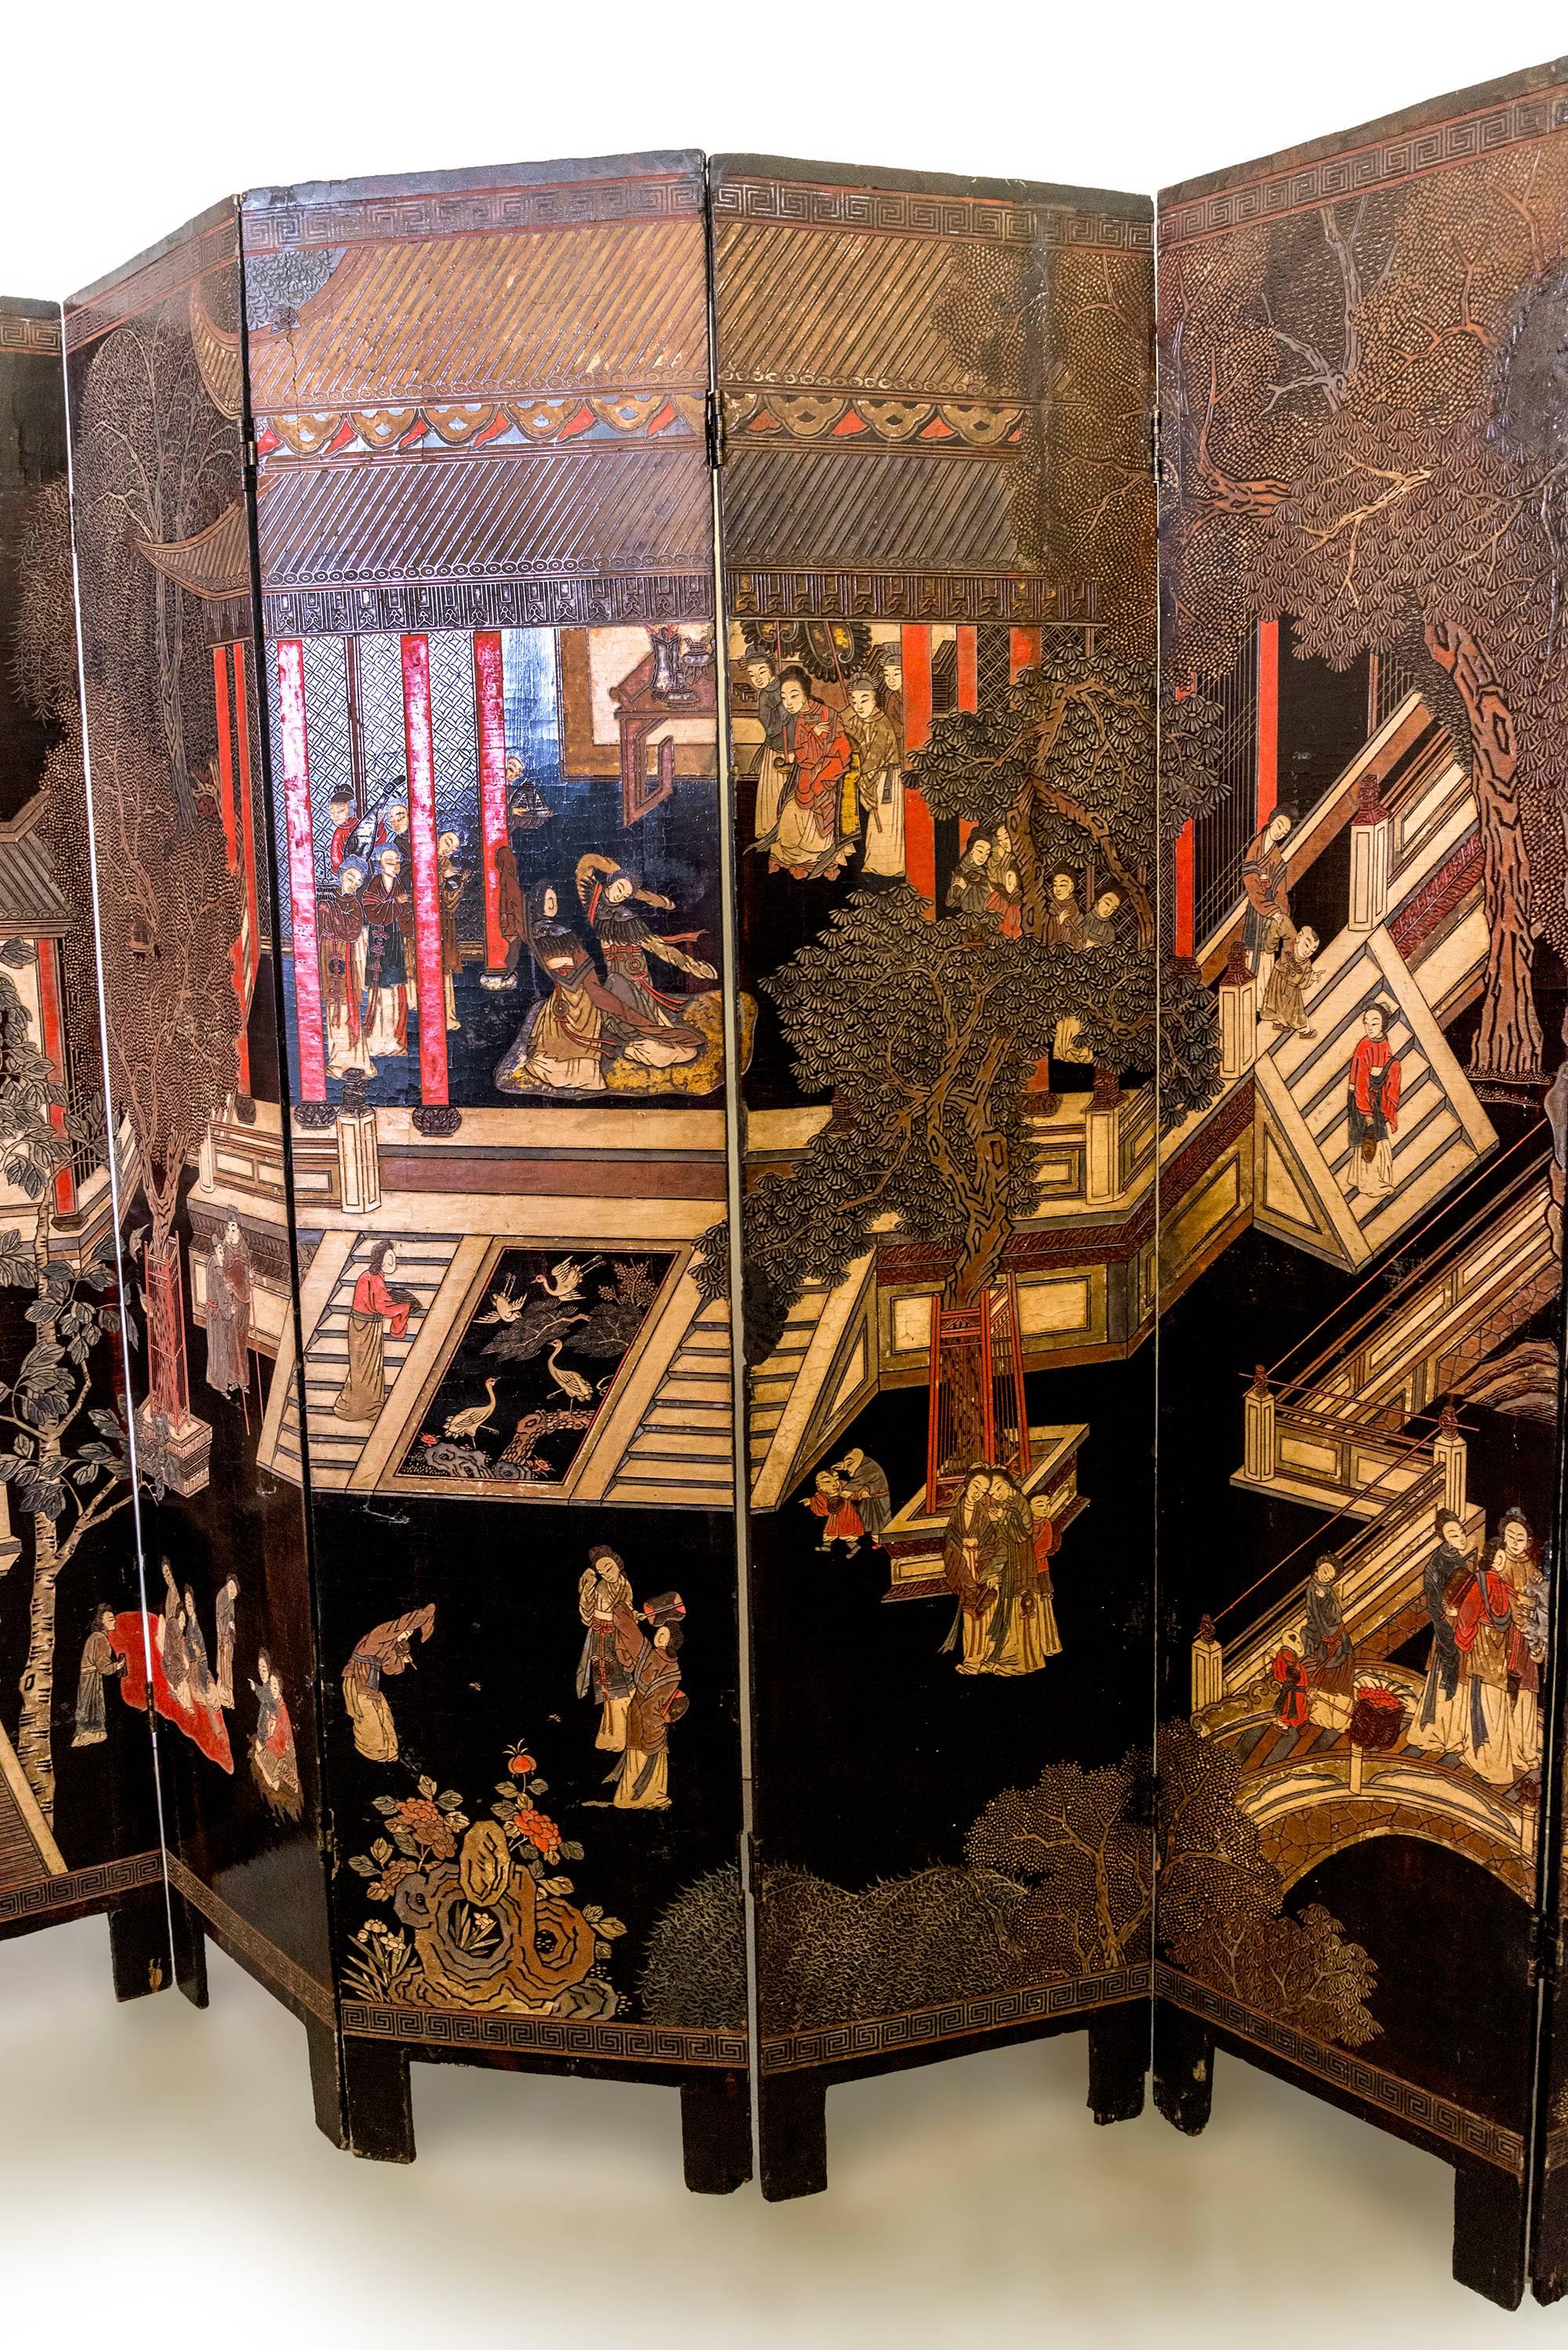 Six-panel double sided coromandel screen. One side depicts Imperial court ladies in various activities; the other side depicts exotic birds in a Lotus pond.
Lacquer. If you know the Visconti film 